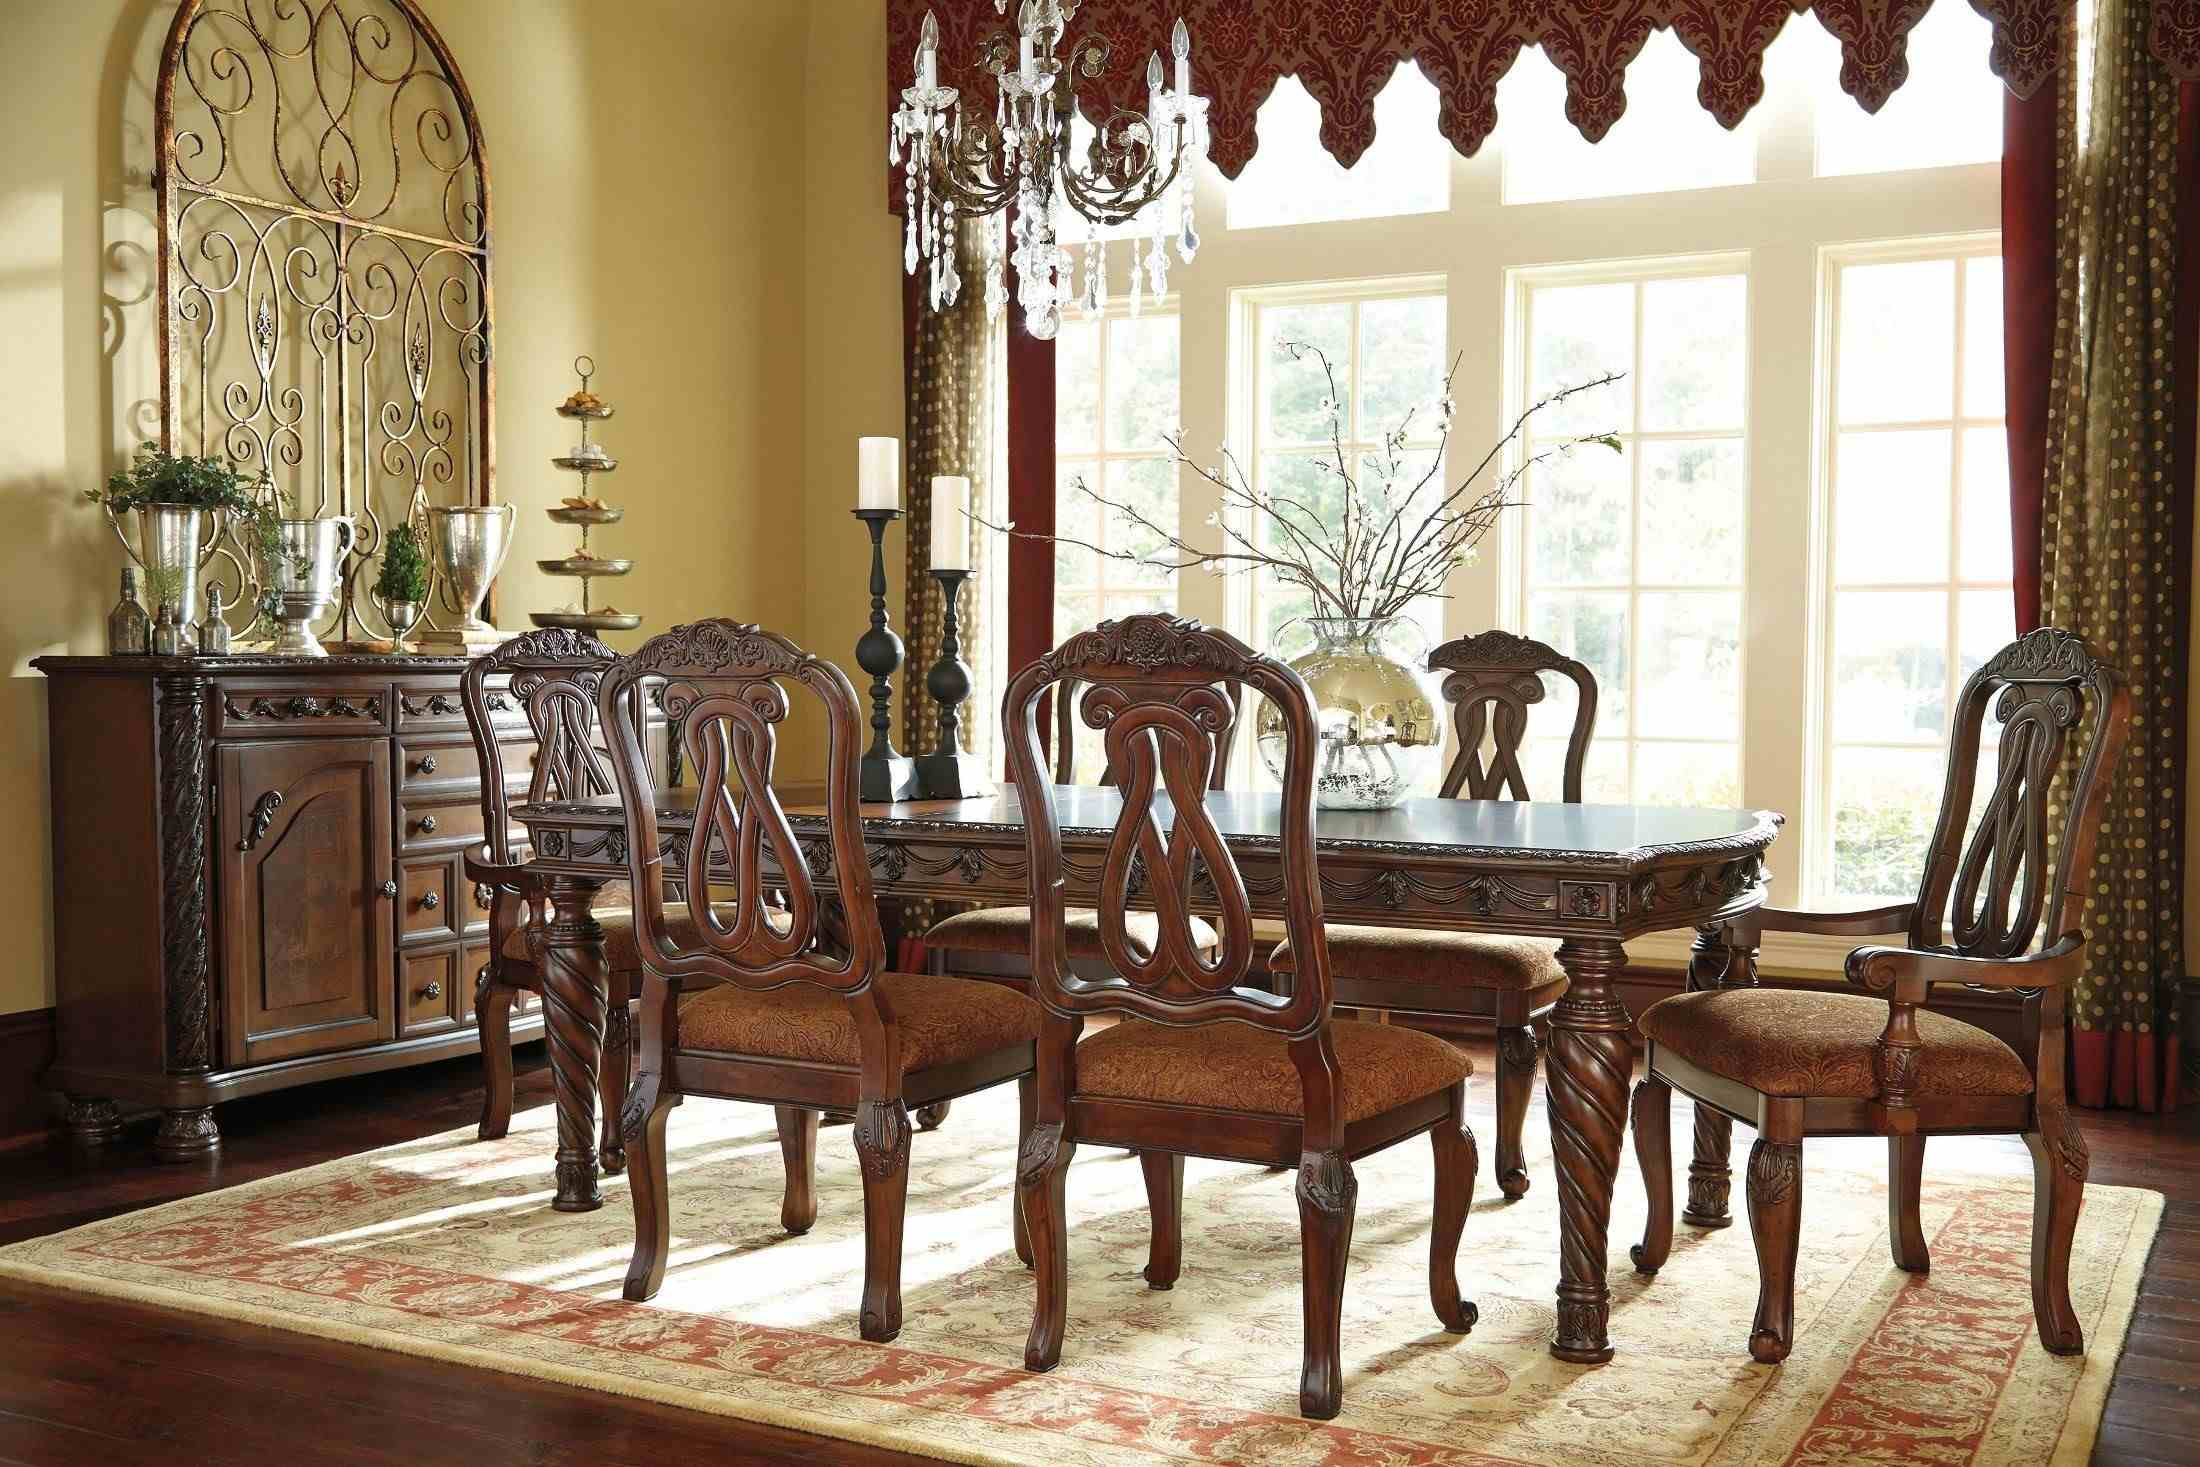 Dining Room Chairs Kijiji Calgary Best Of Dining Room with regard to dimensions 2200 X 1467